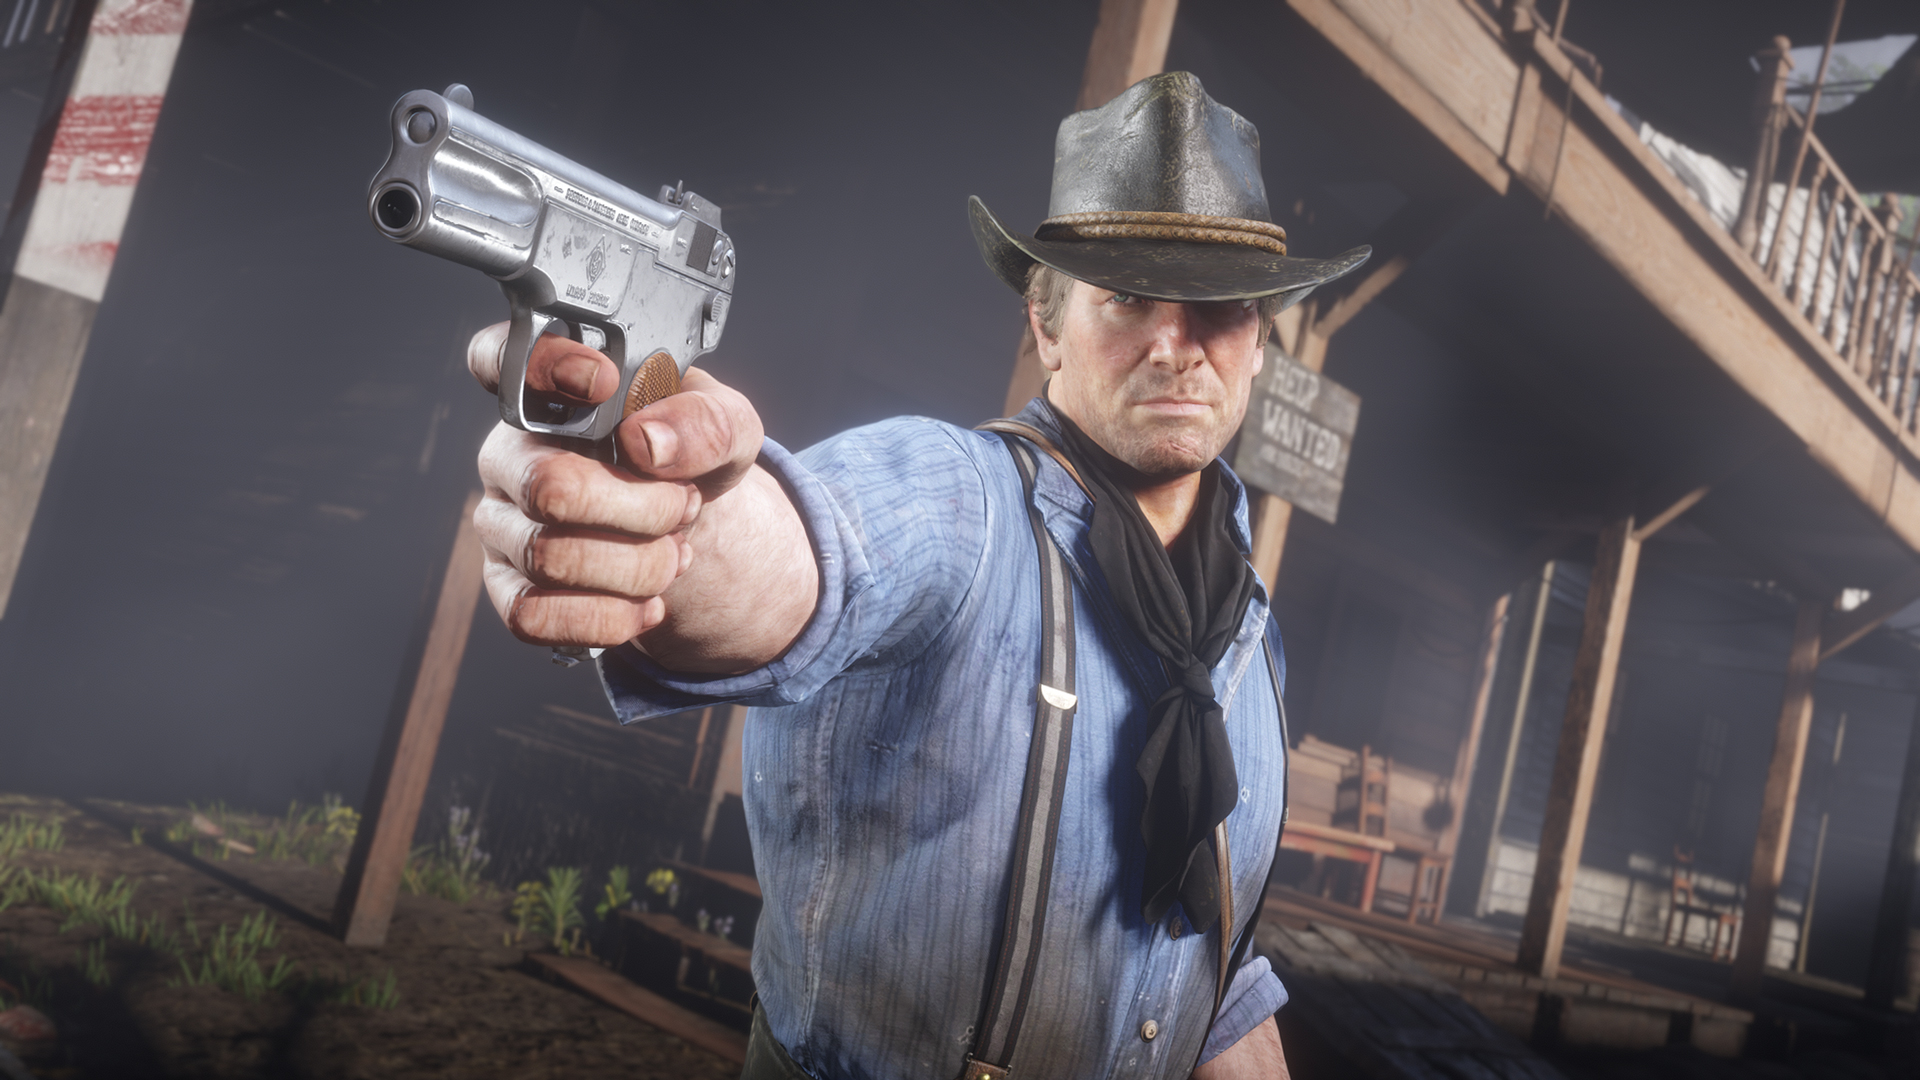 Red Dead Redemption 2 Photo and Story Mode Additions Now Available on PS4 - Games